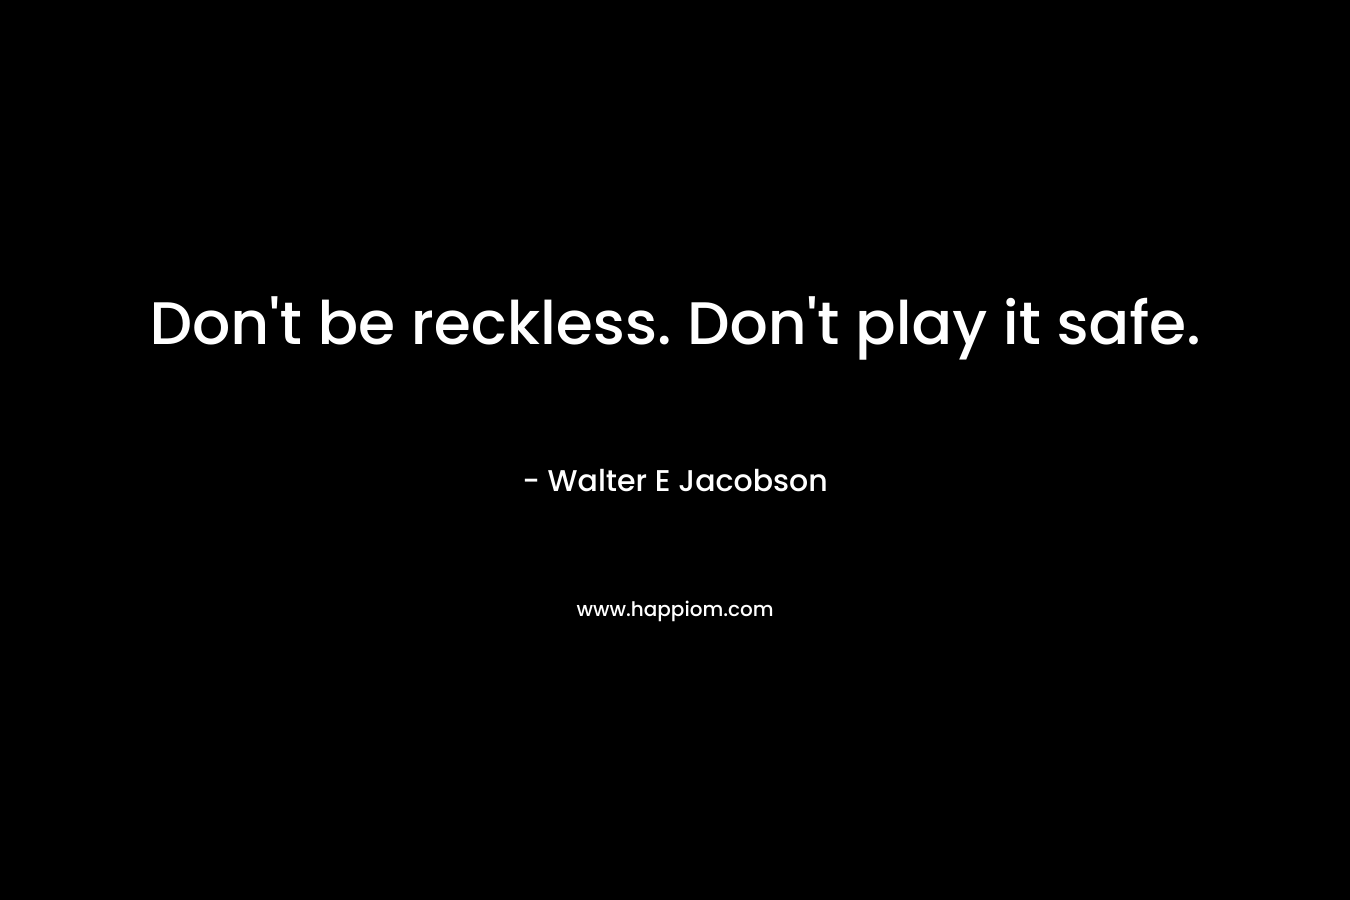 Don't be reckless. Don't play it safe.